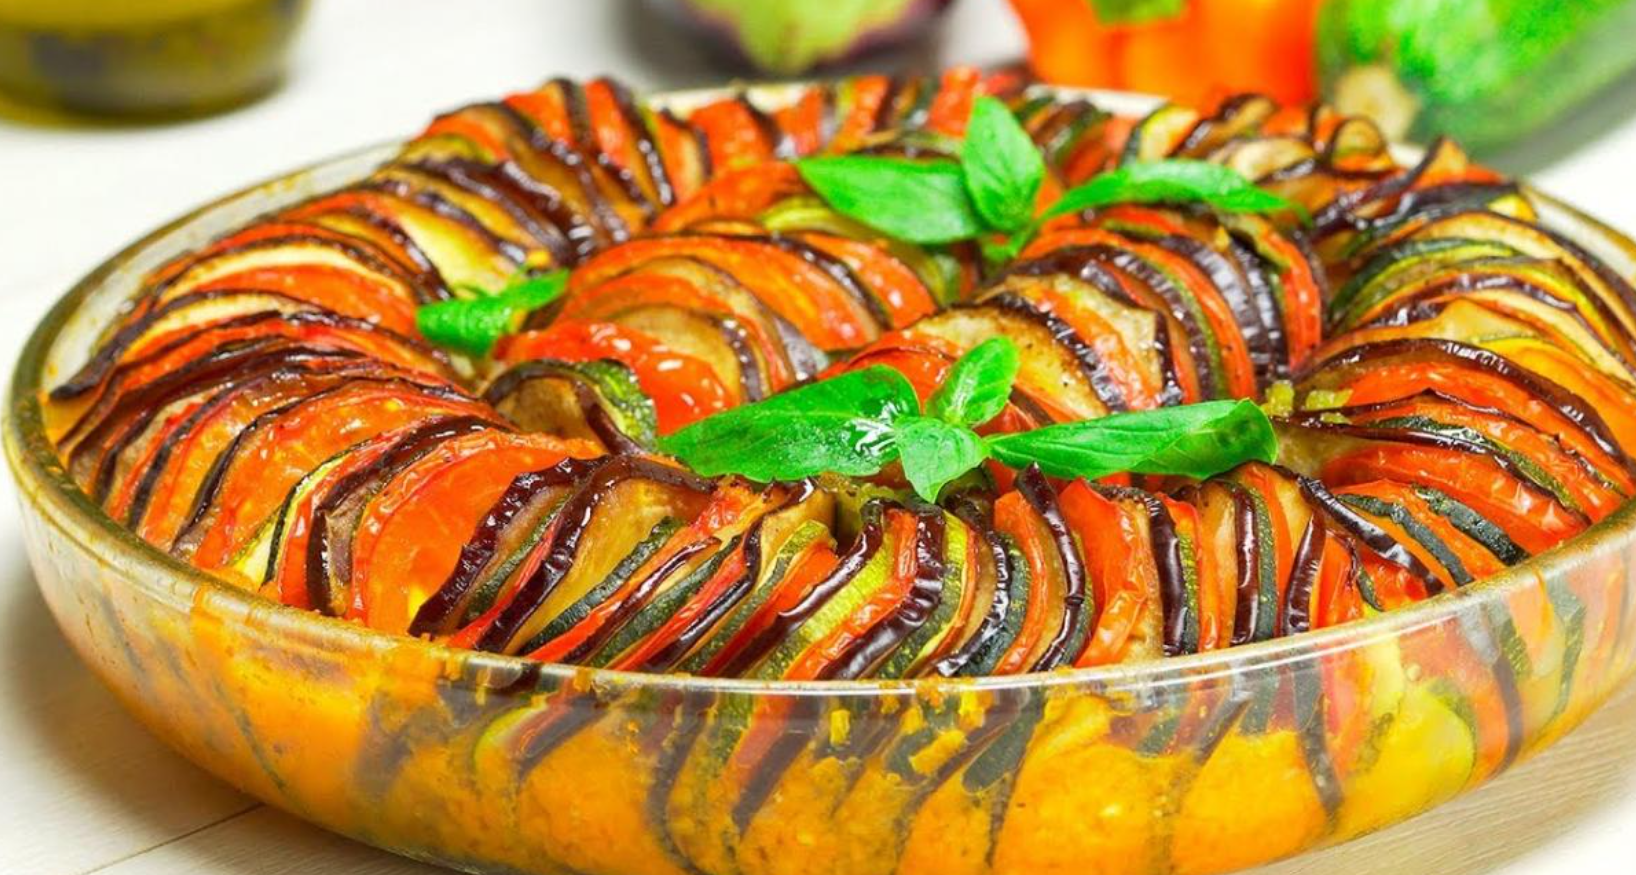 Ratatouille made from vegetables